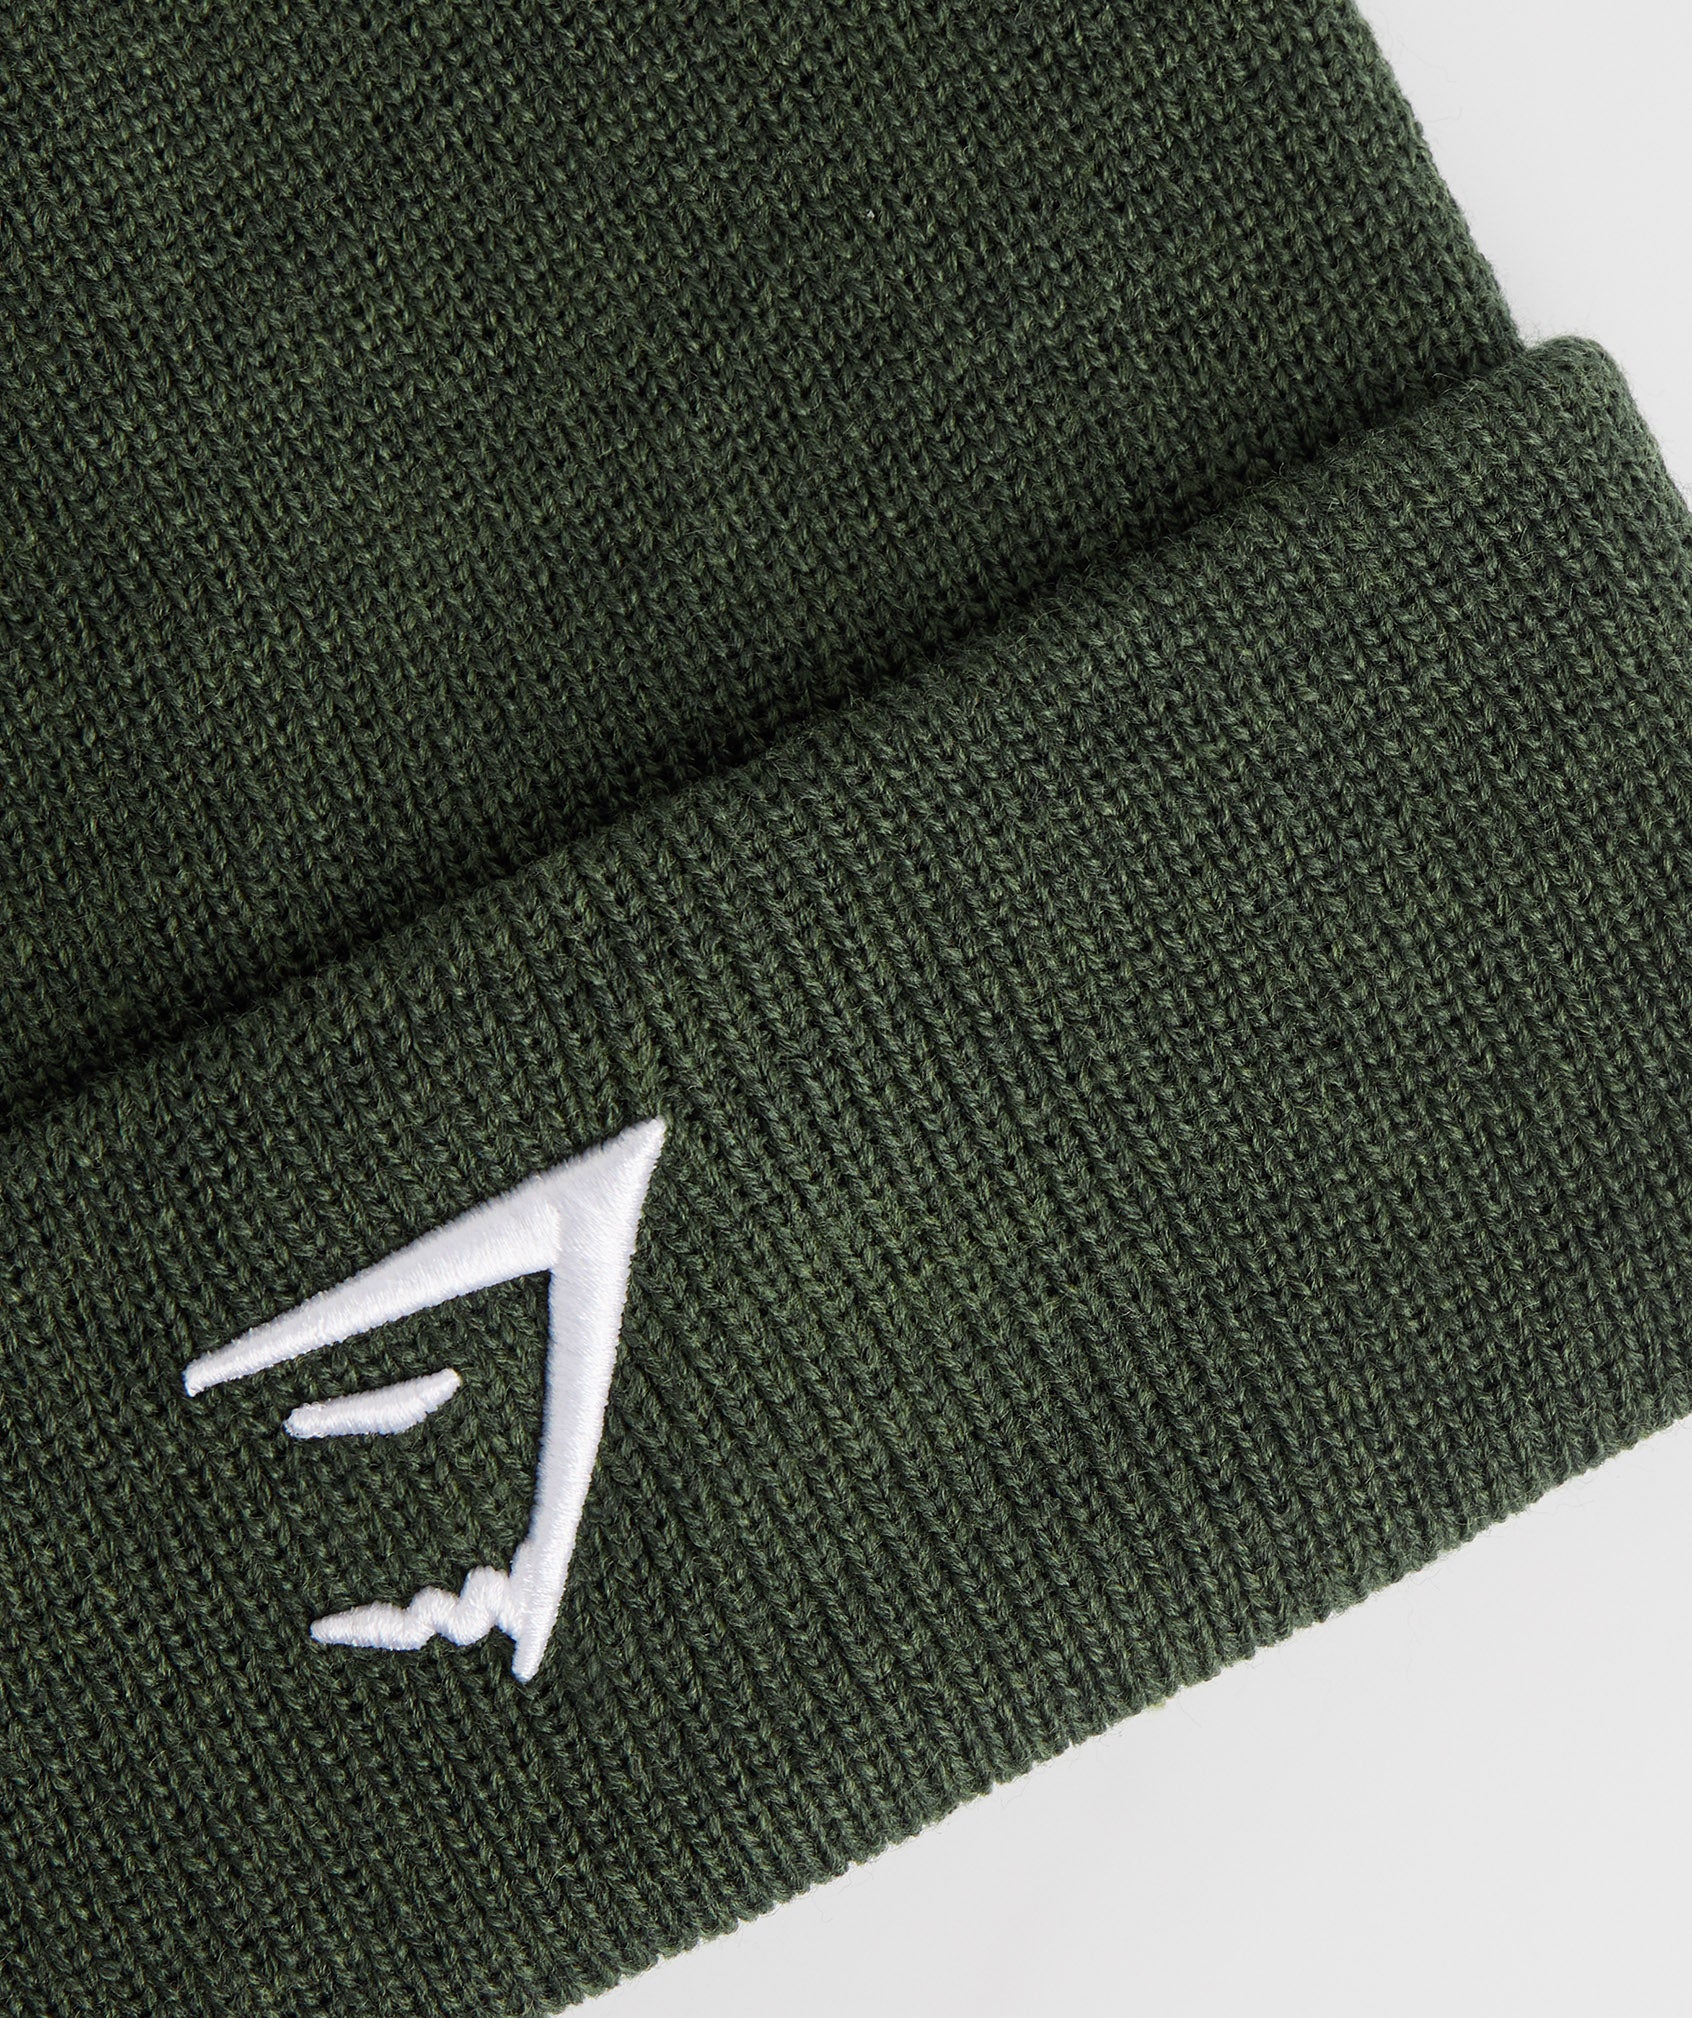 Sharkhead Beanie in Moss Olive - view 2